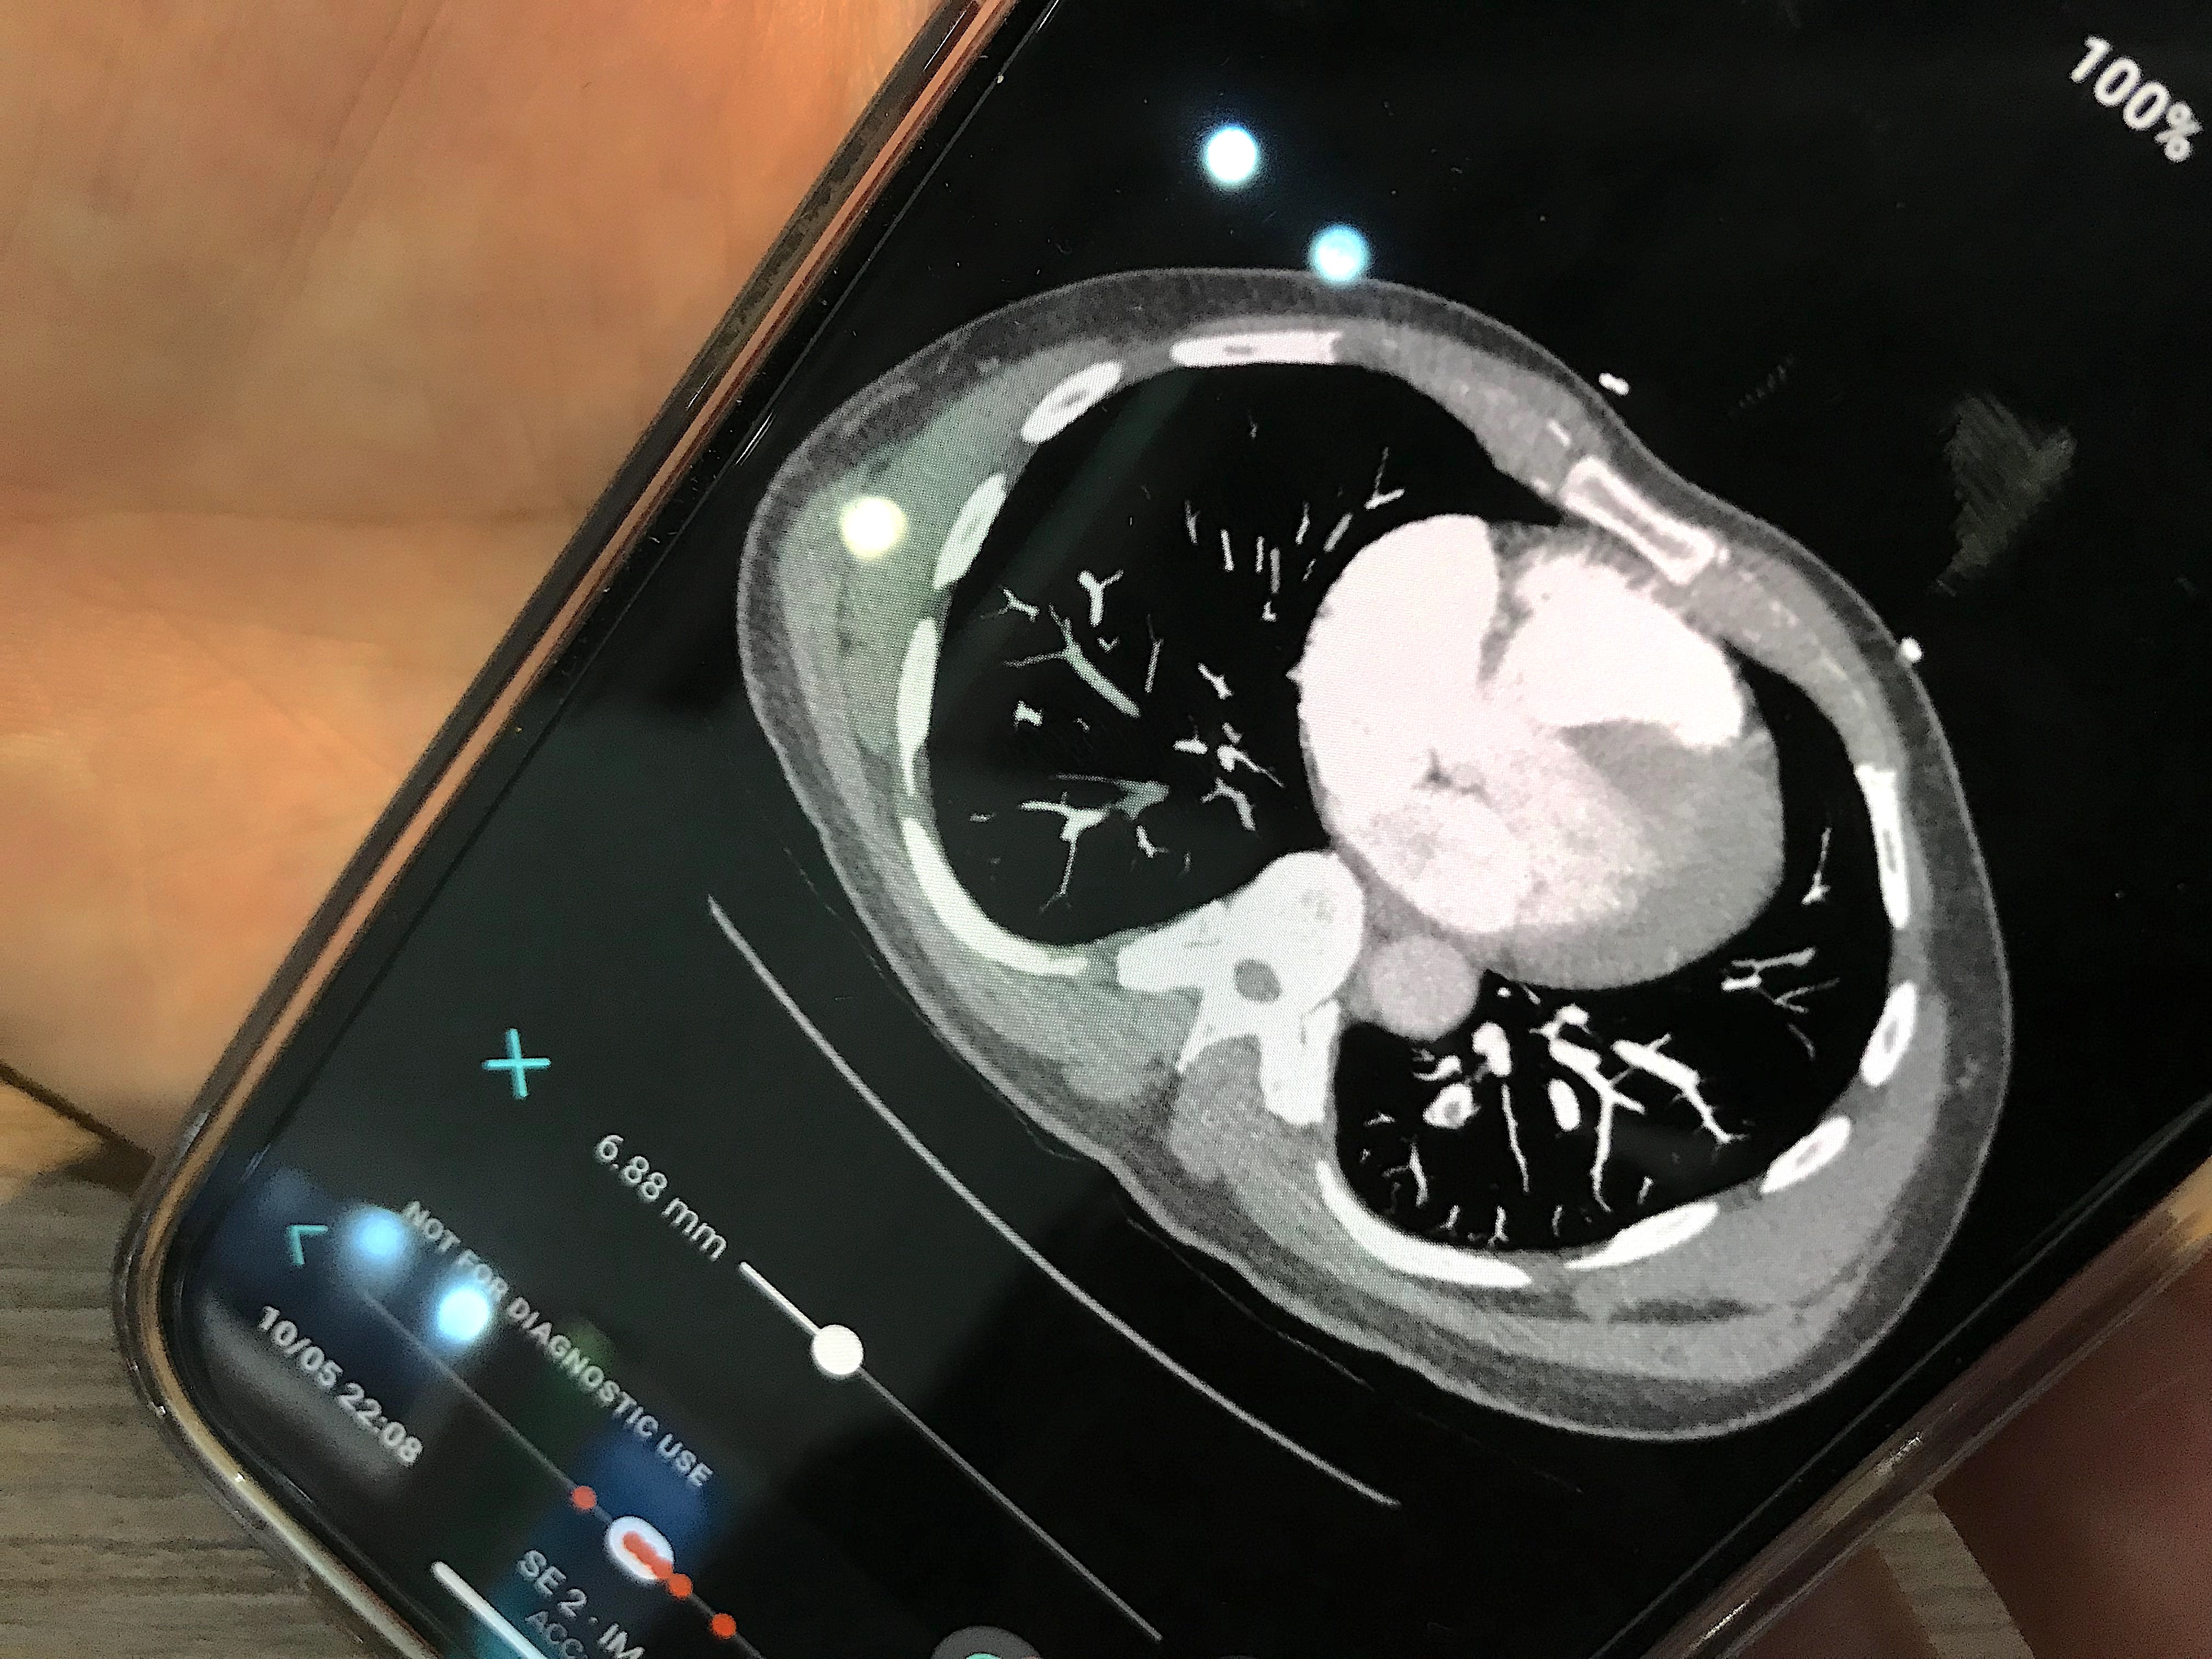 Aidoc's artificial intelligence PERT activation app showing how the CT scan can be viewed on a smartphone. The orange dots at the bottom of the page mark key slices were the AI detected pulmonary emboli. Photo by Dave Fornell